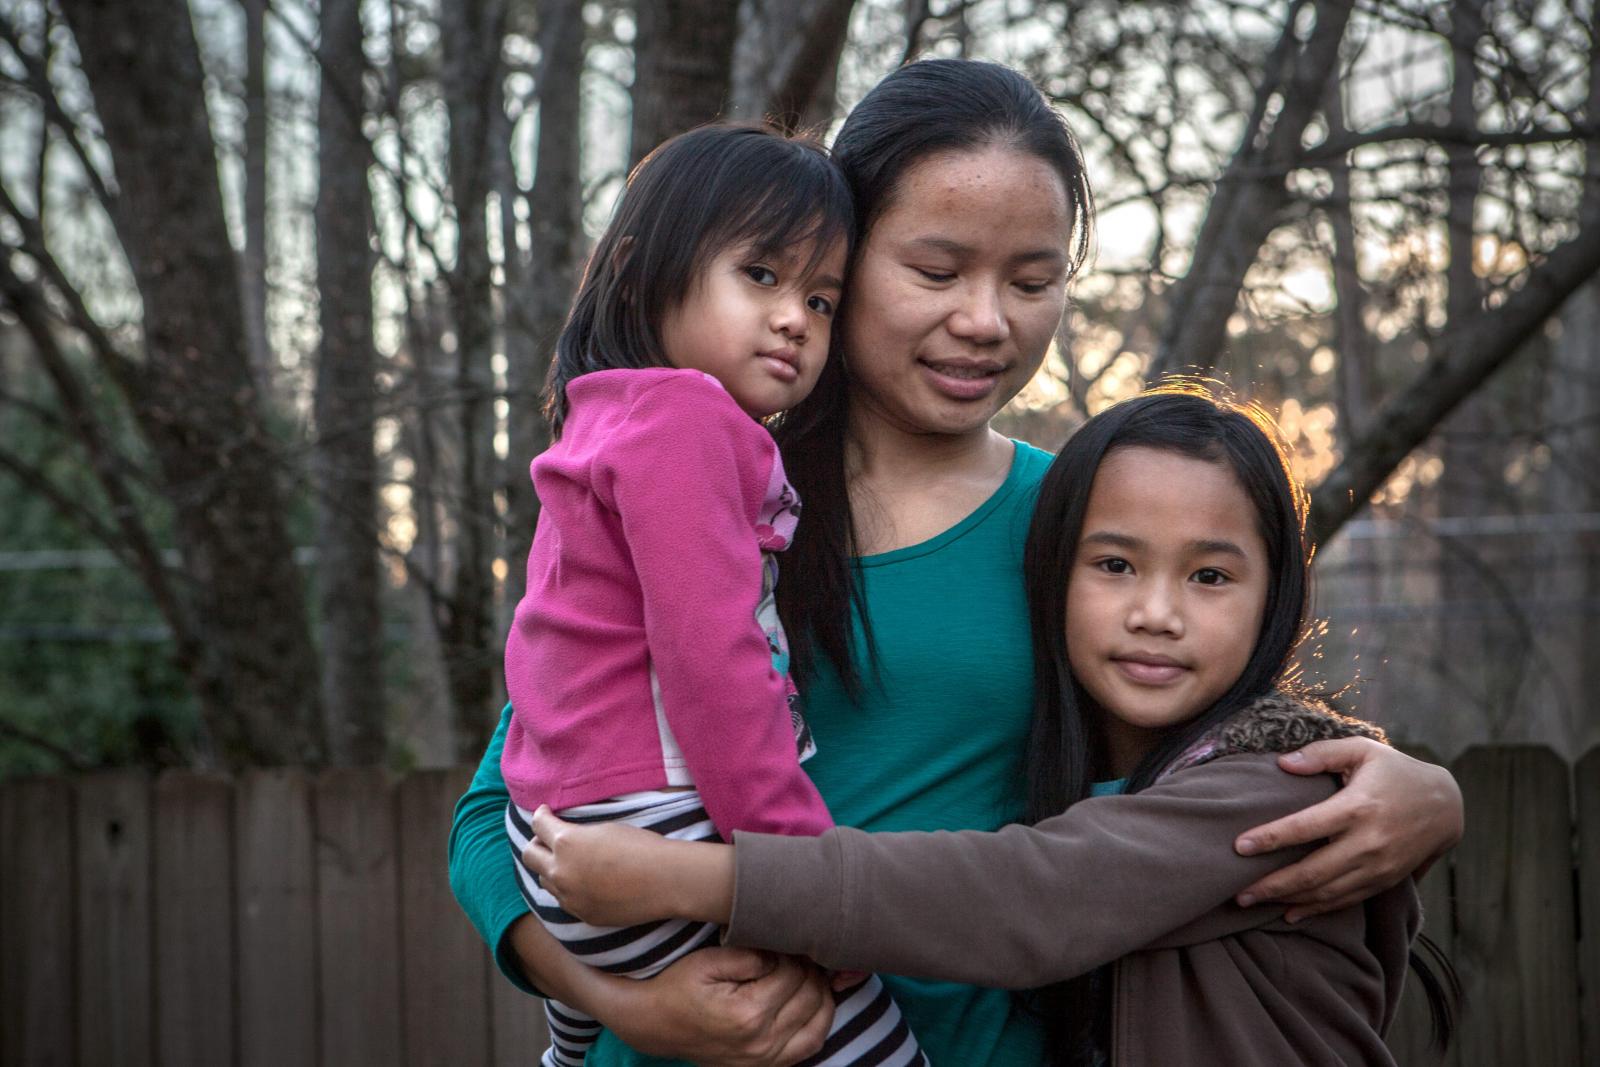 Klaw Htoo and her daughters Gloria and Sophia lived in a refugee camp in Thailand for nine years when they fled from Myanmar. Image Courtesy of rescue.org